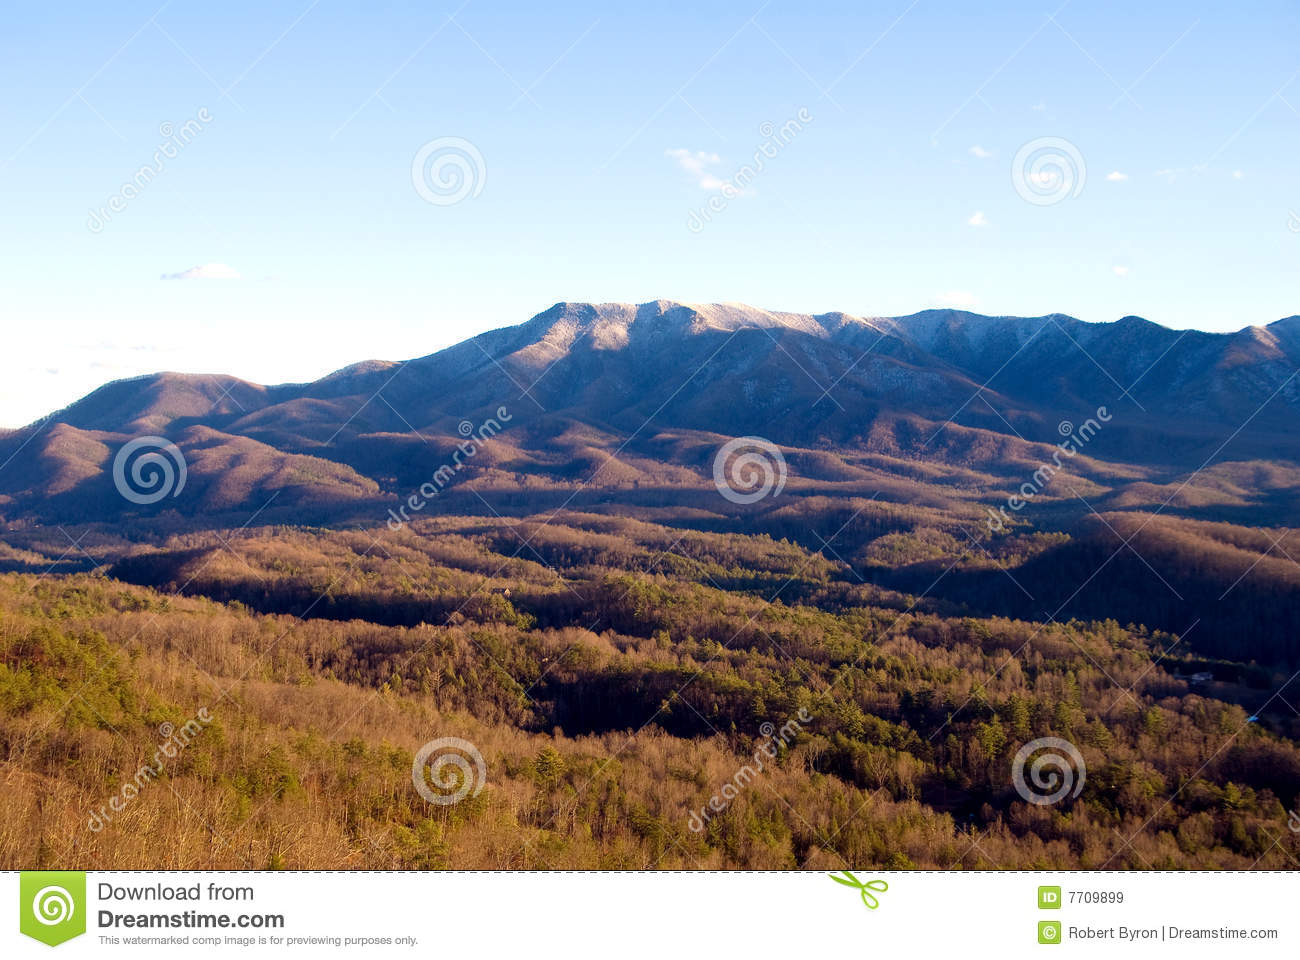 Appalachian Mountains Royalty Free Stock Images   Image  7709899